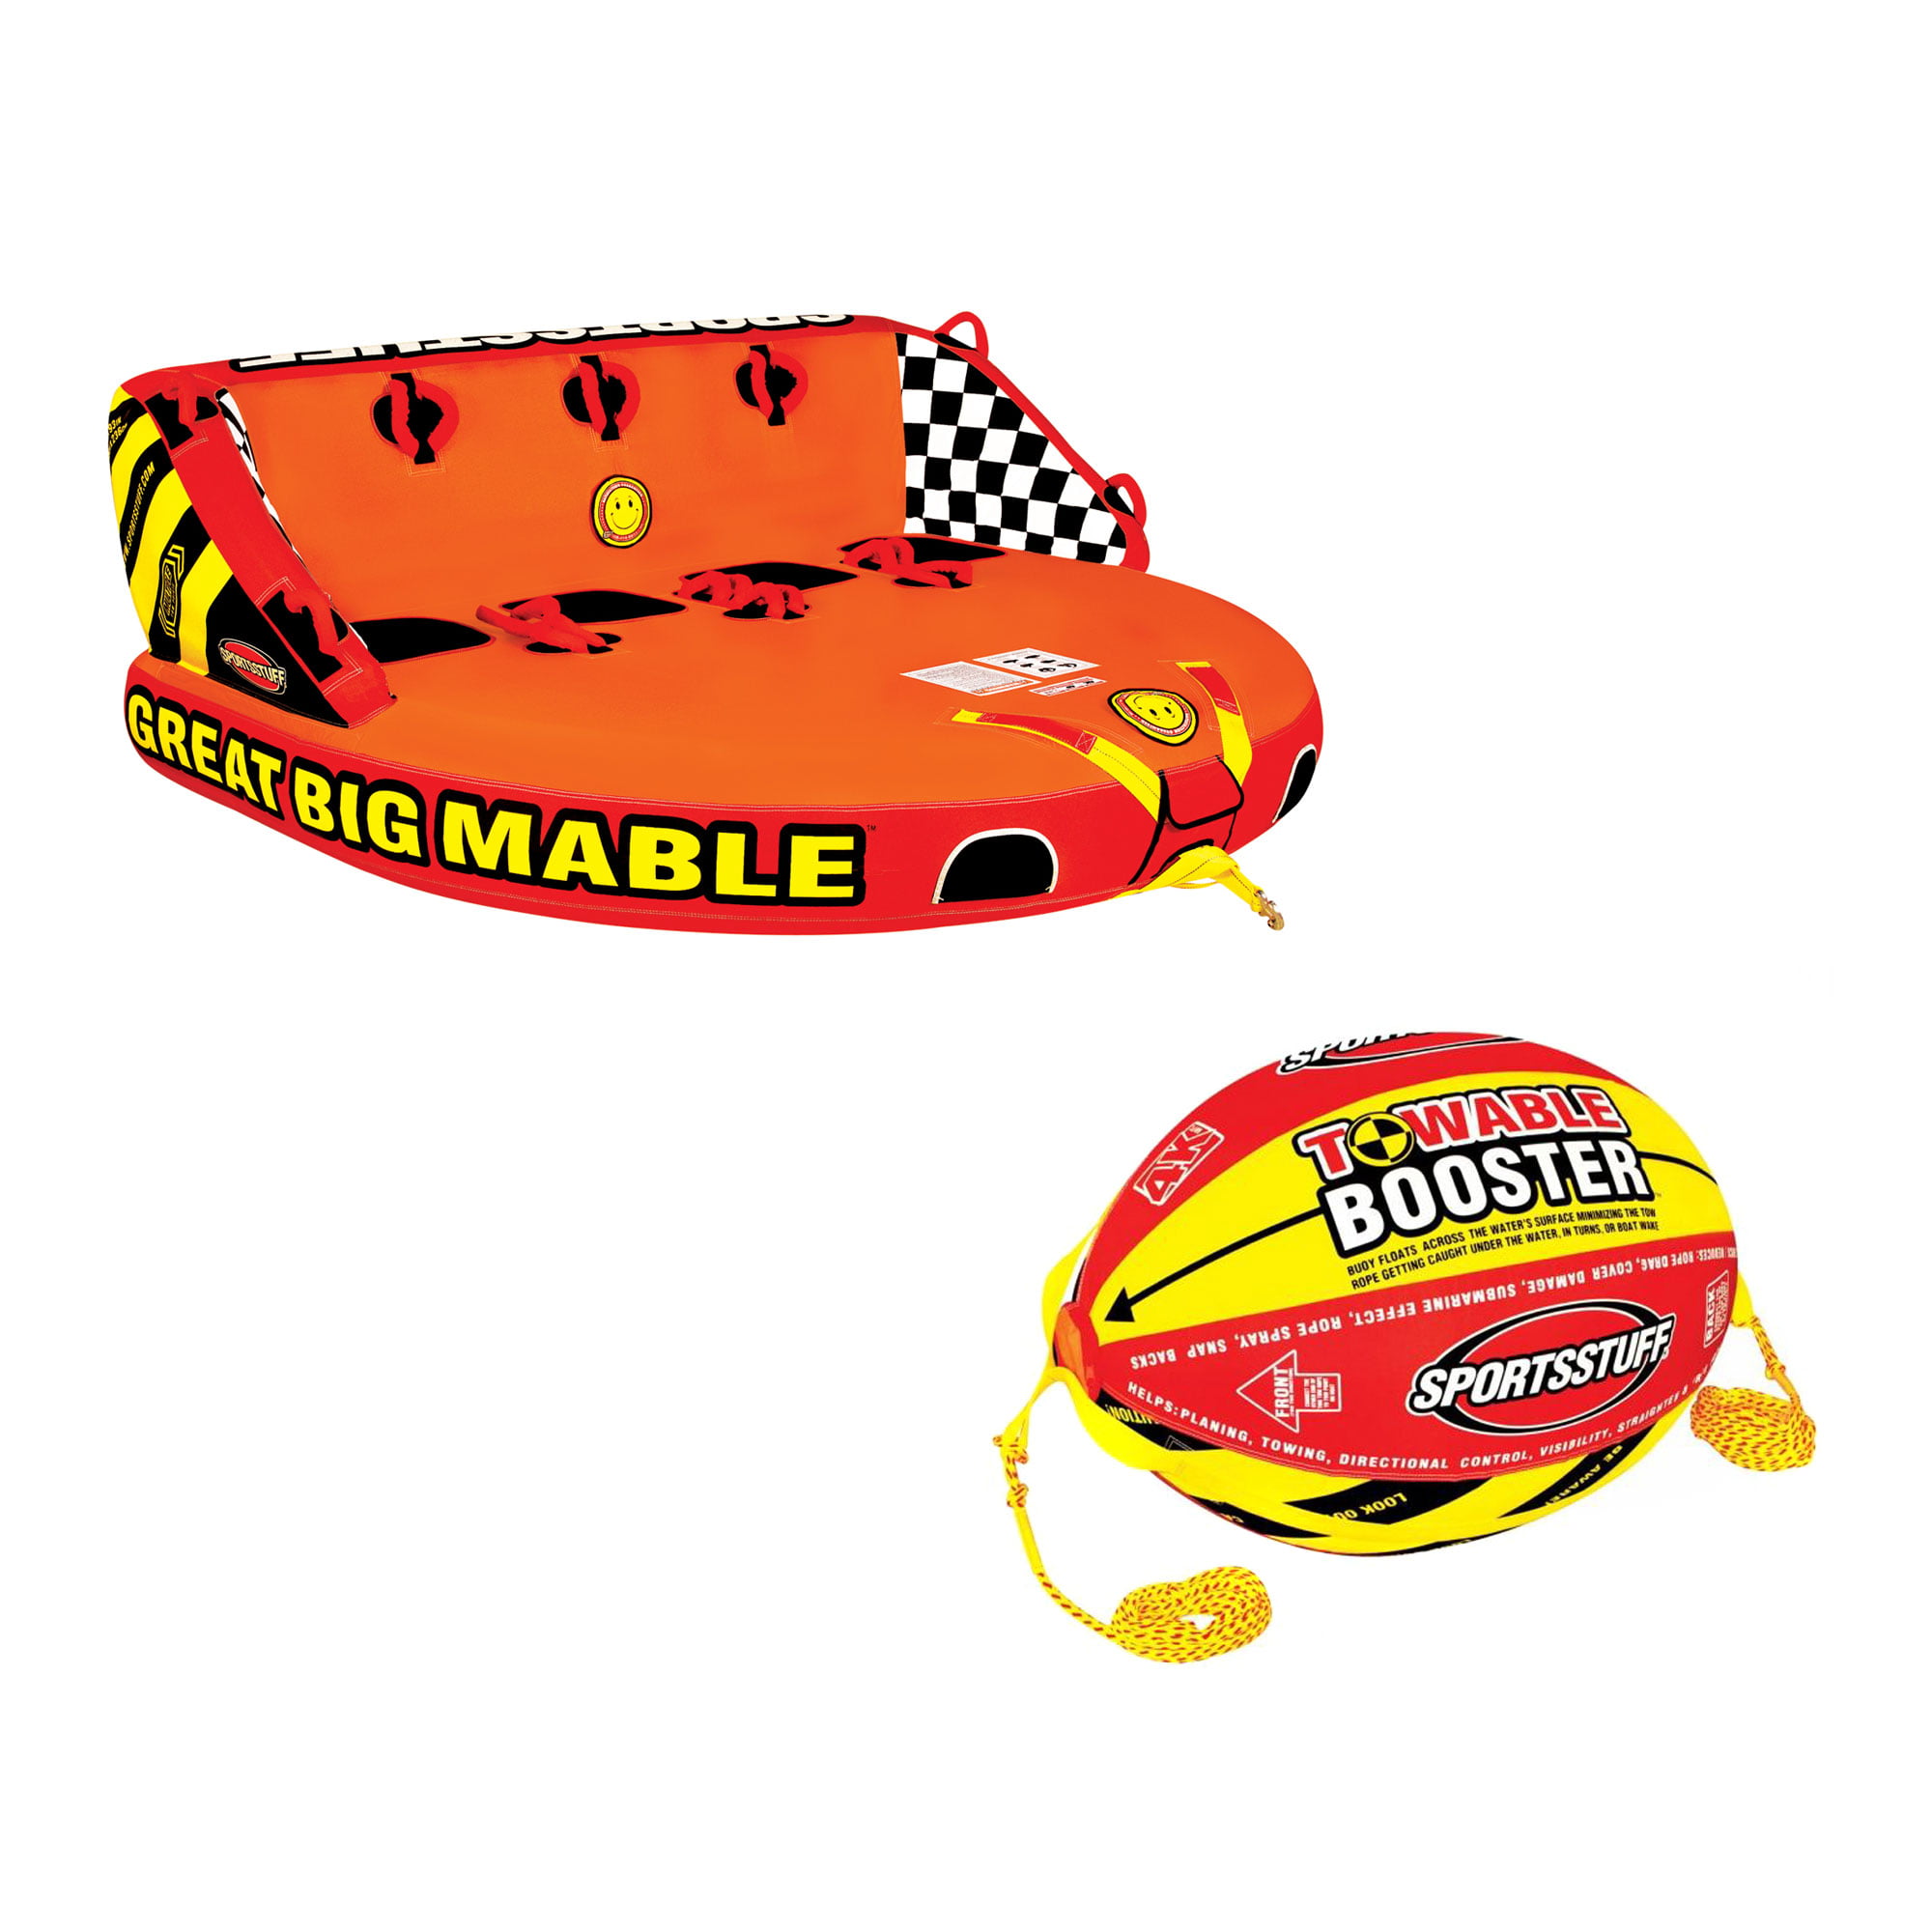 Sportsstuff Mable 4-Rider Towable Tube & Airhead 4K Booster Towing System |  Walmart Canada